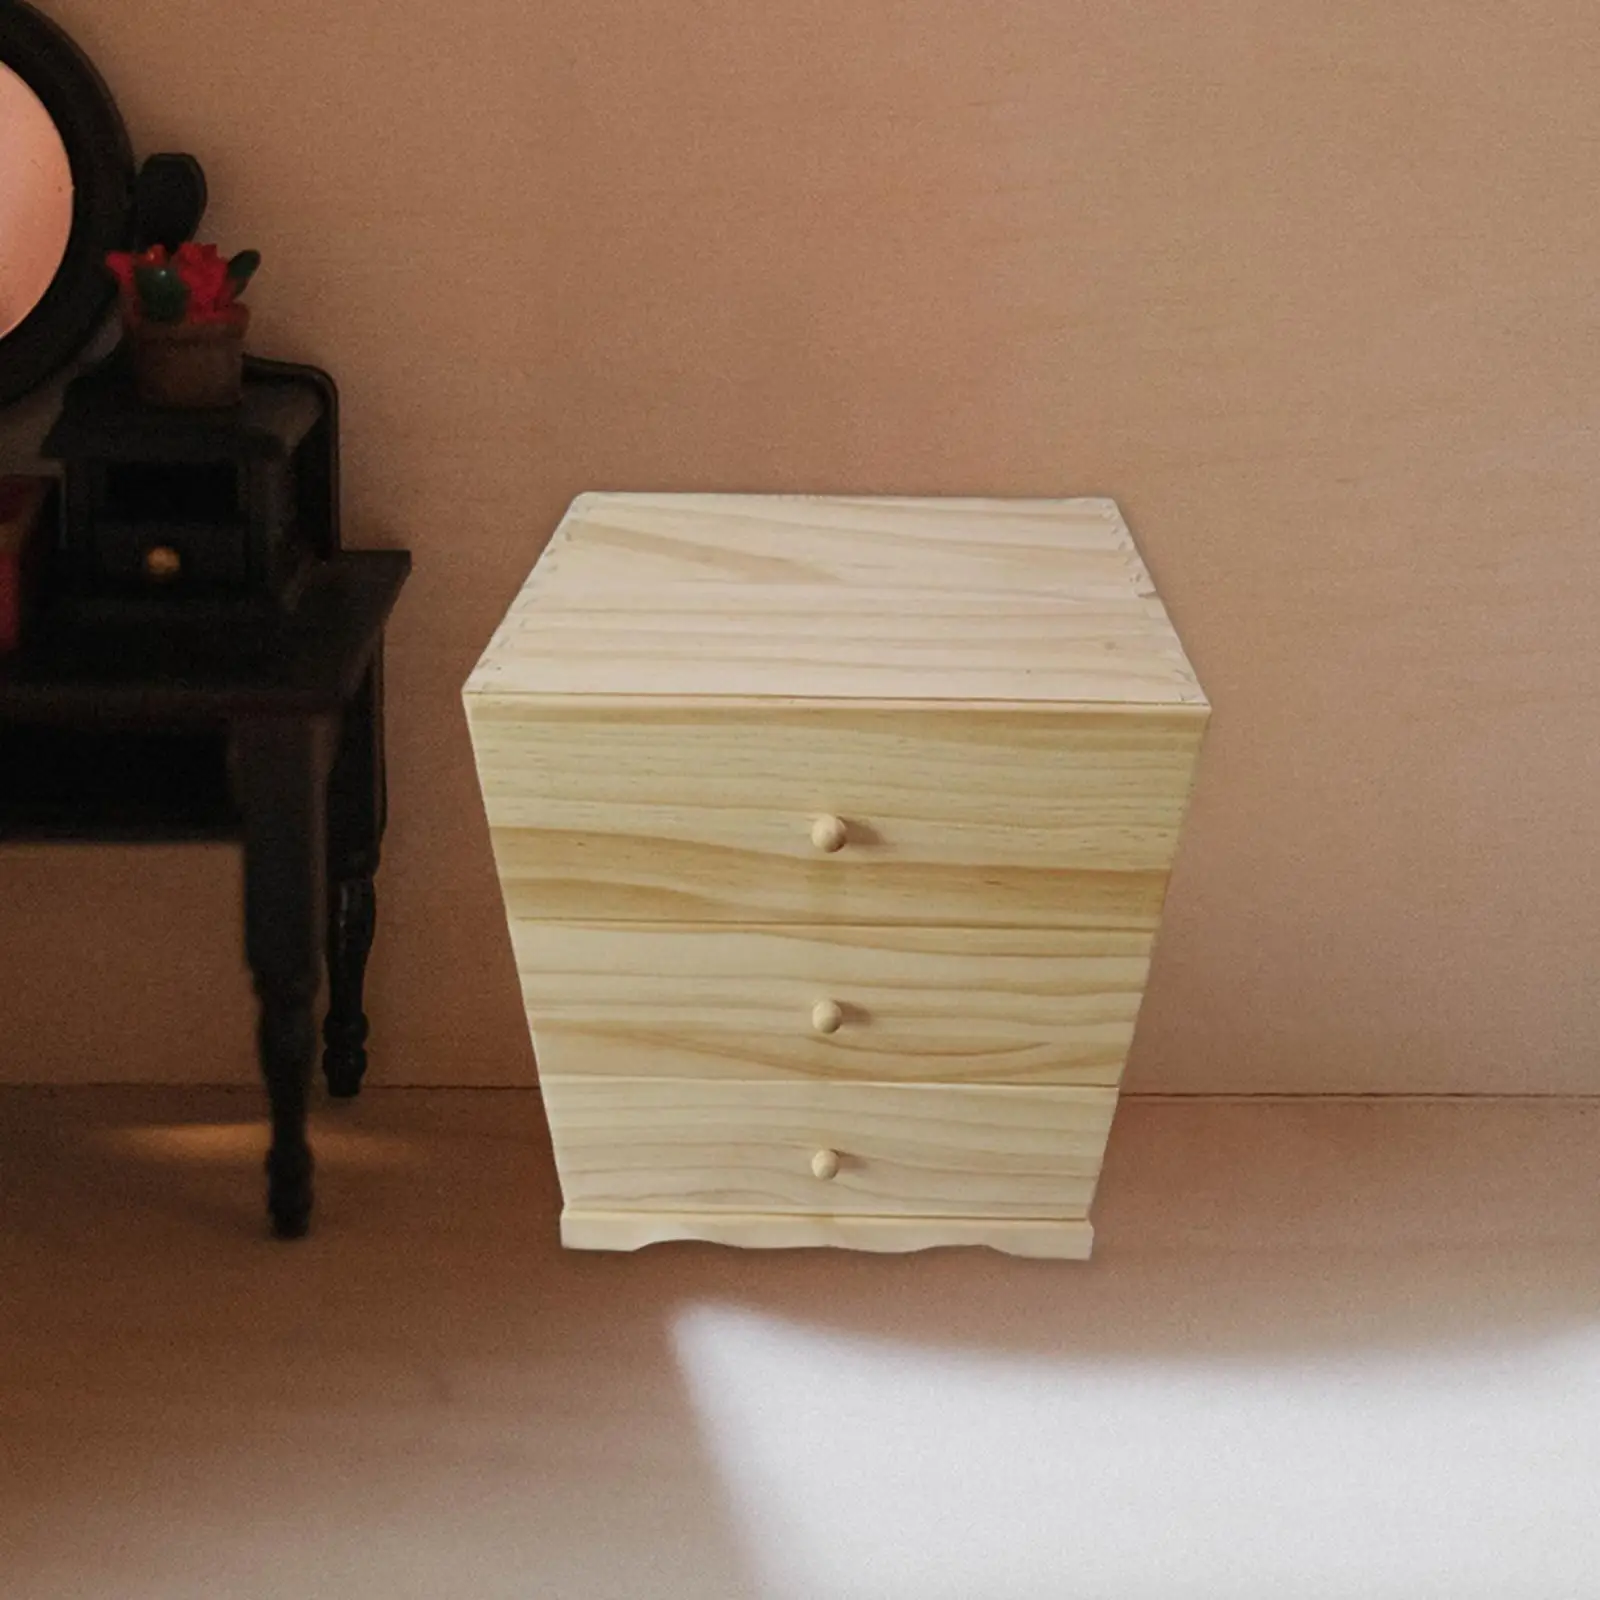 Essential Oil Storage Box Case Tier Height 7.5cm Space Saver Presentation 90 Slots Holder Protects Your Oils Display Wood Holder